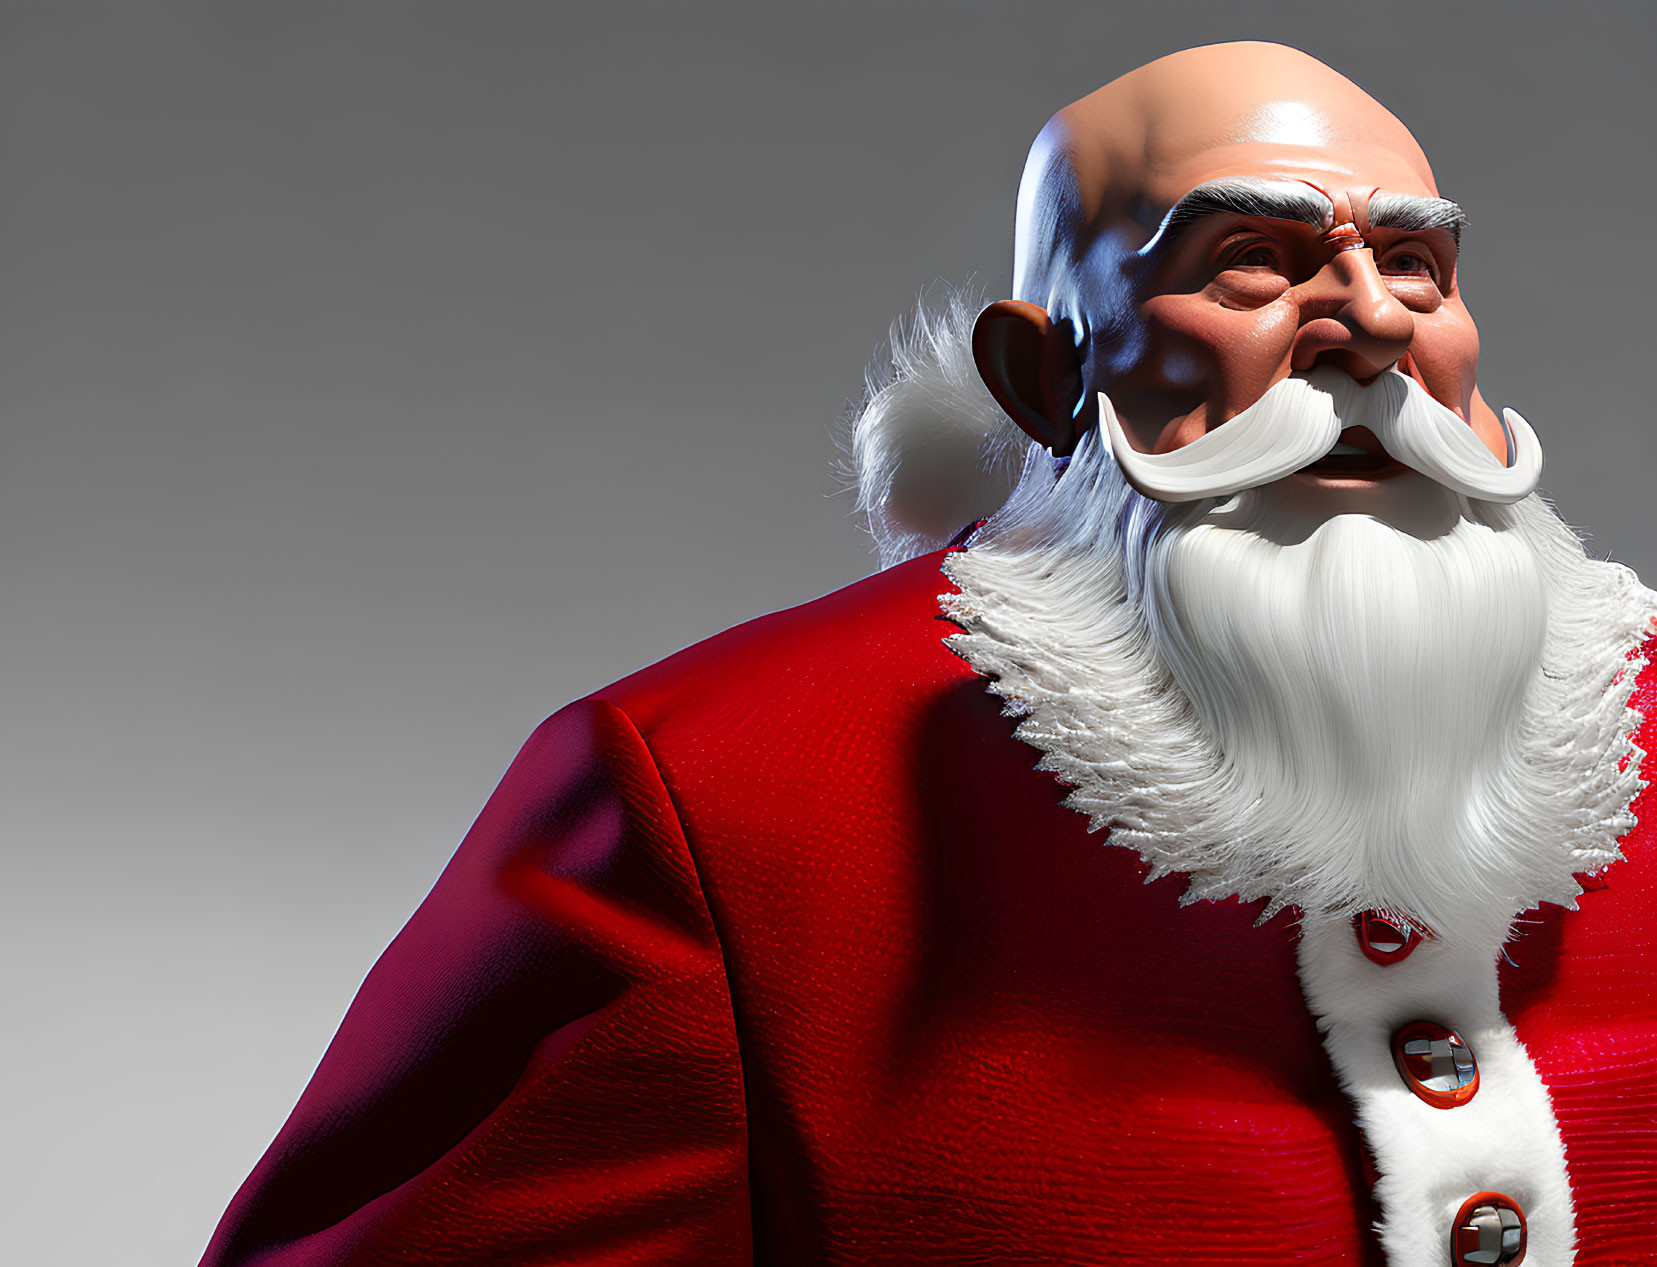 Elderly character with white beard in red outfit - 3D-rendered image